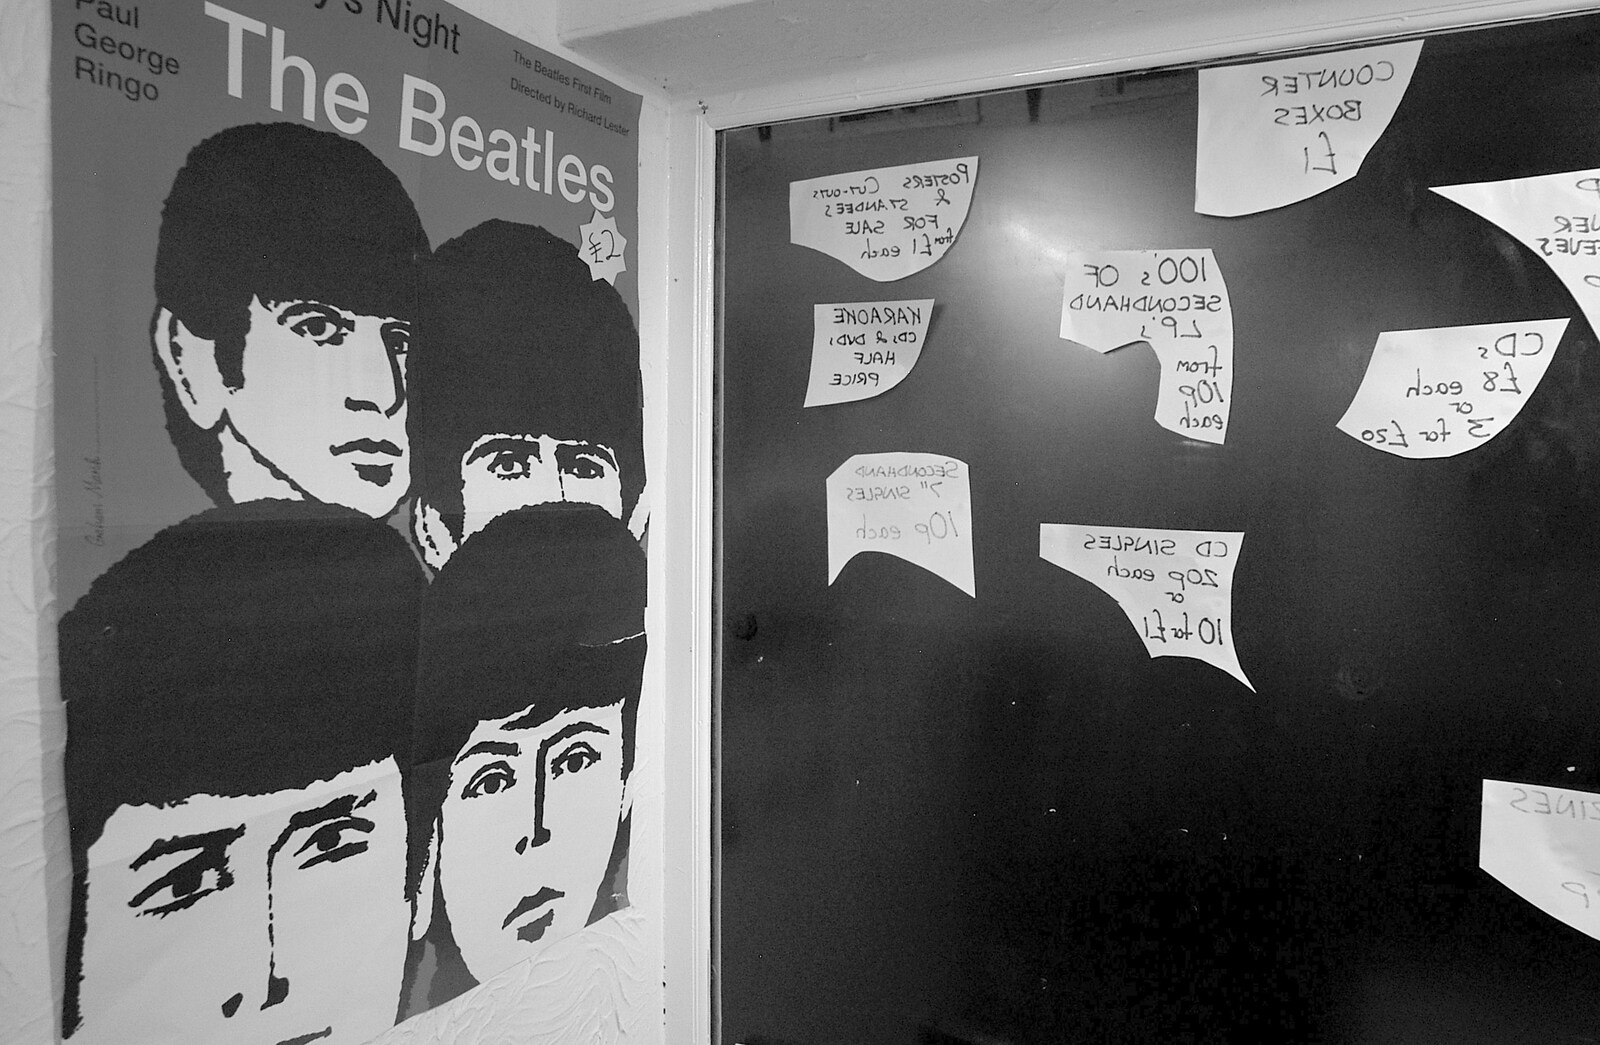 A Beatles poster from Closing Down: Viva La Revolution Records, Diss, Norfolk - 21st January 2006